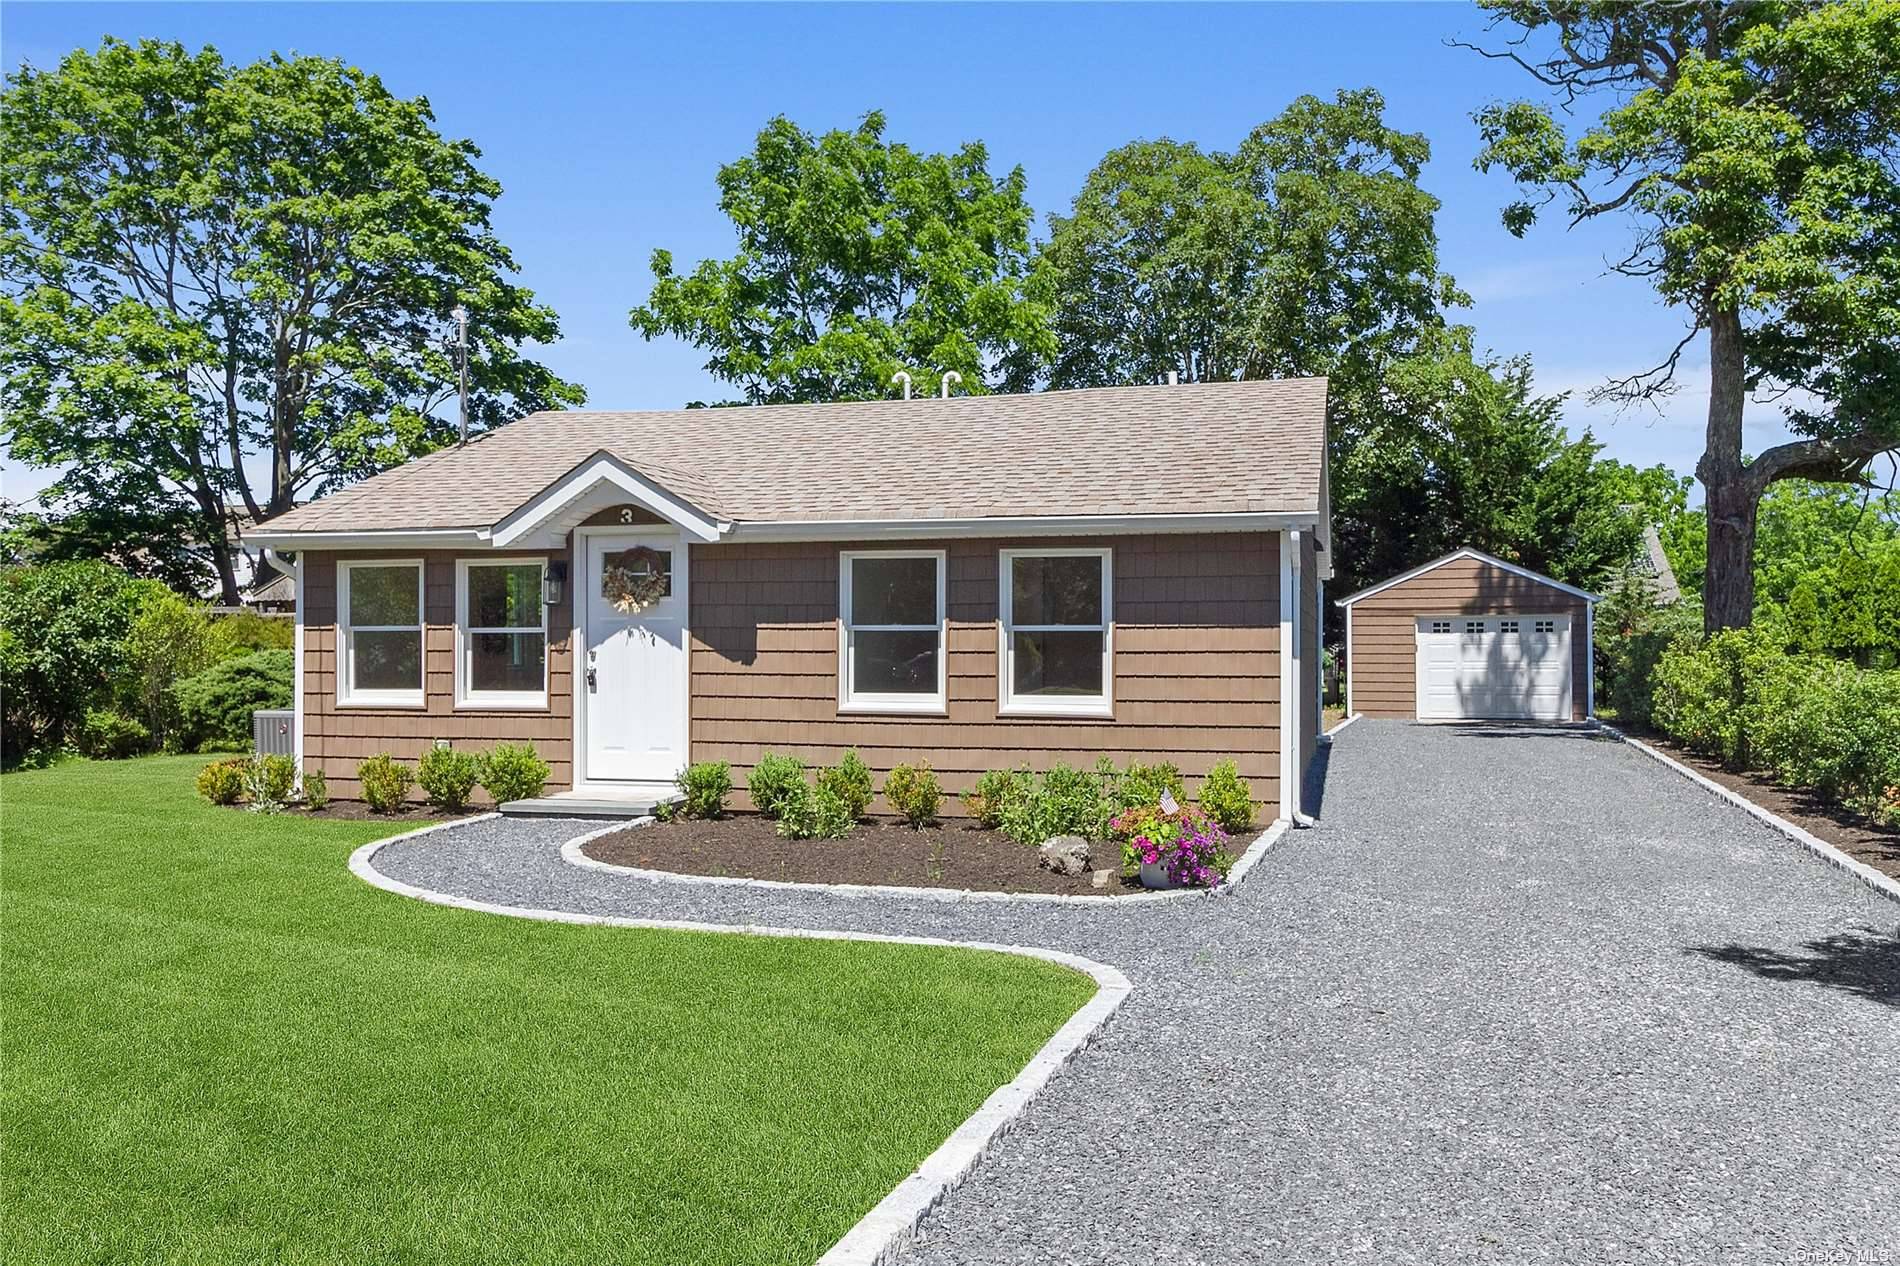 Completely renovated ranch style home just a stone's throw to all of what the east end of Long Island has to offer, from the world class beaches of the south ...